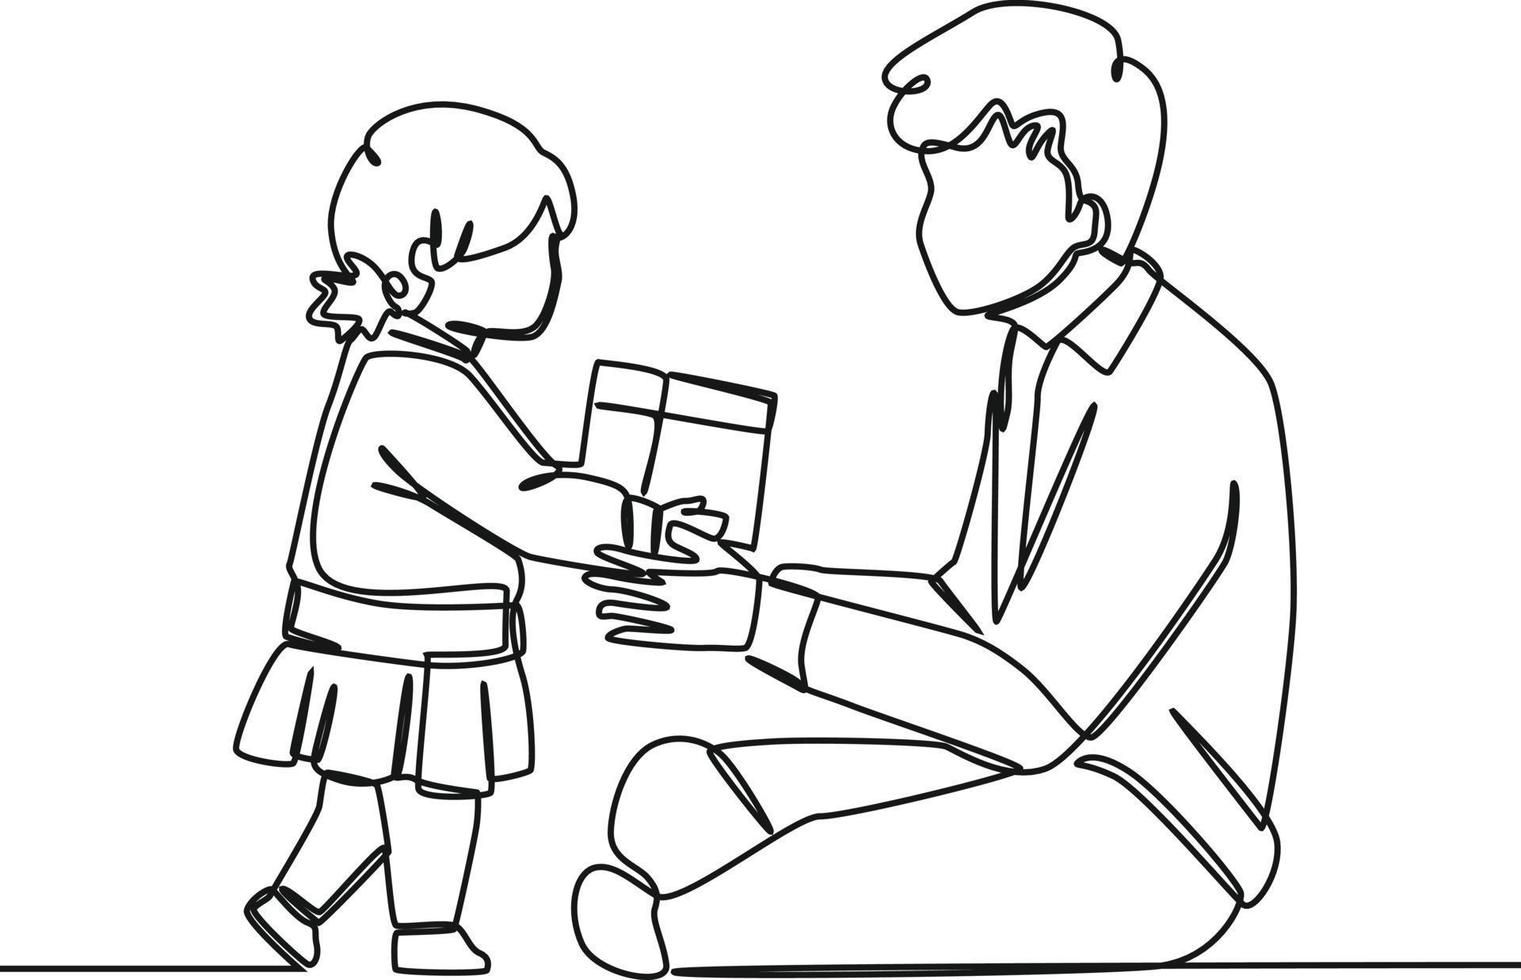 Continuous one line drawing of girl child giving present to her father. Father is superhero. Happy father's day. Single line draw design vector graphic illustration.